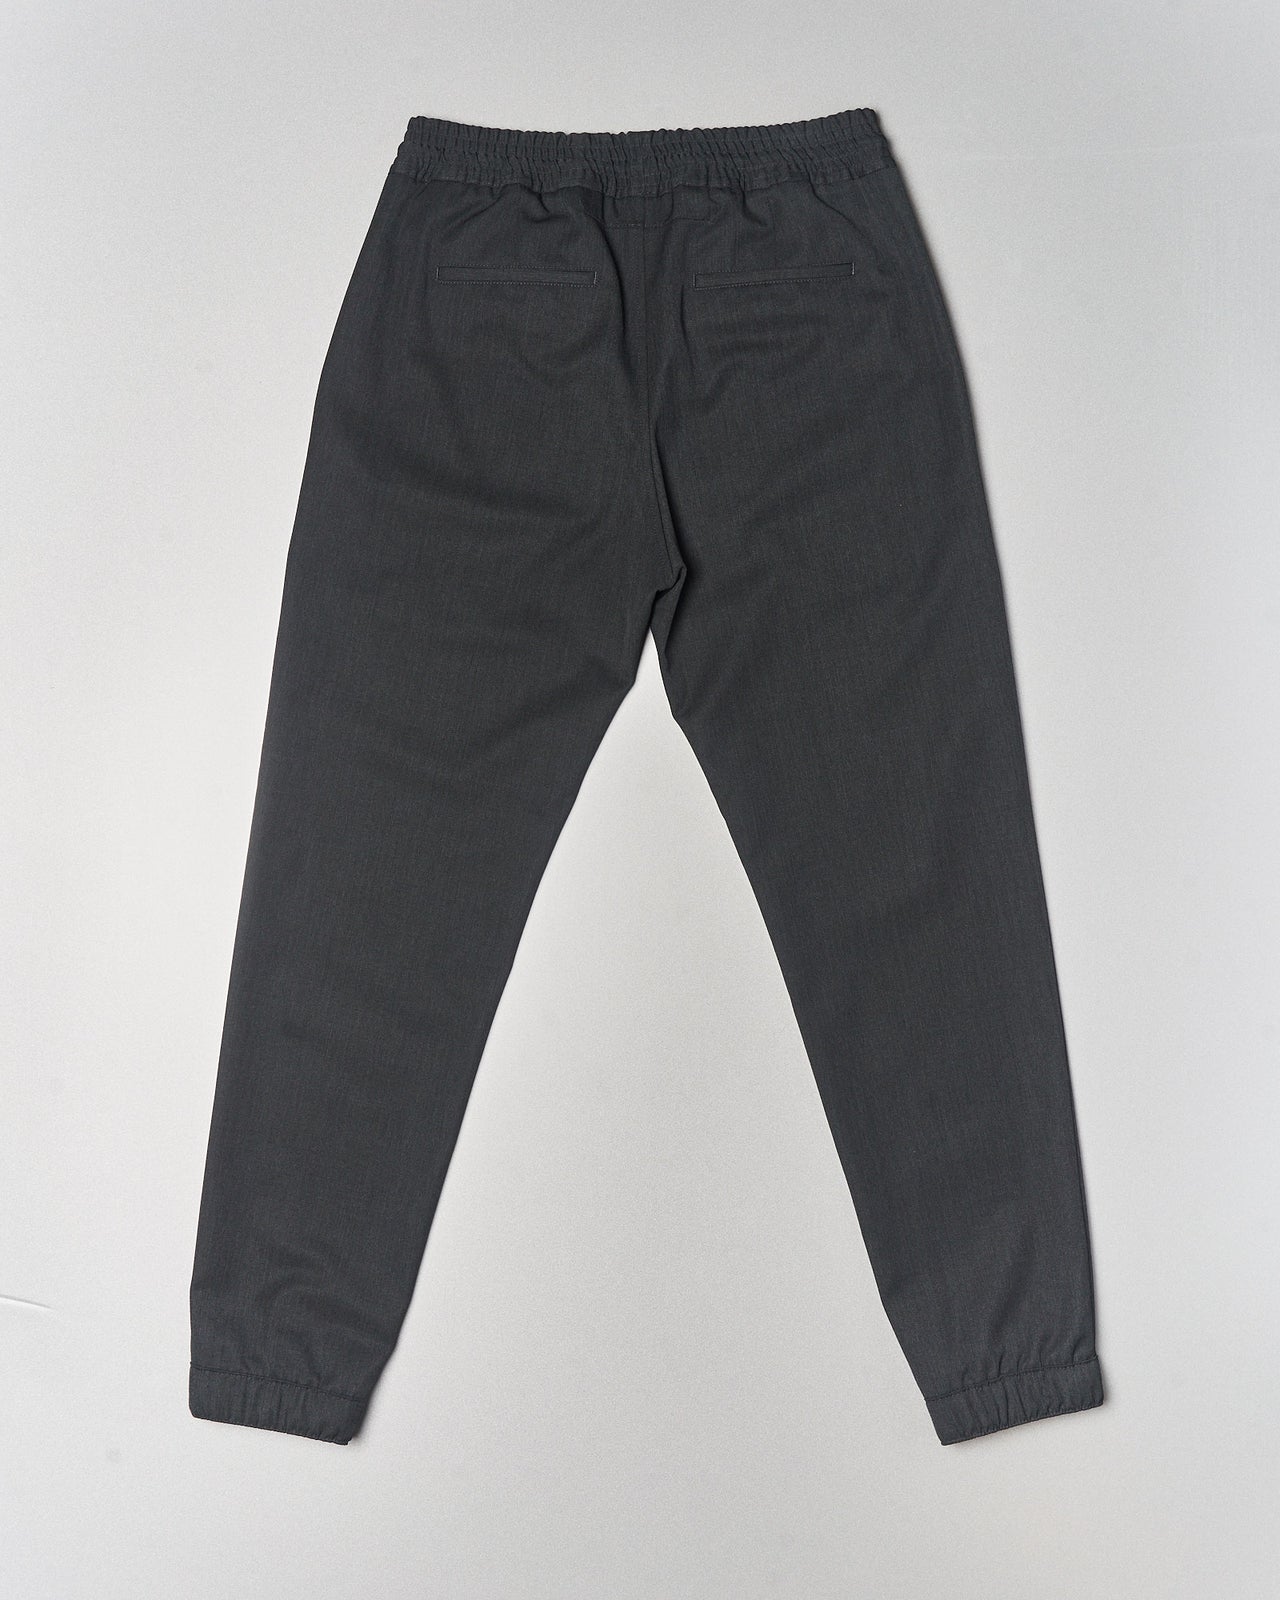 Givenchy Contrasting Band Jogging Trousers